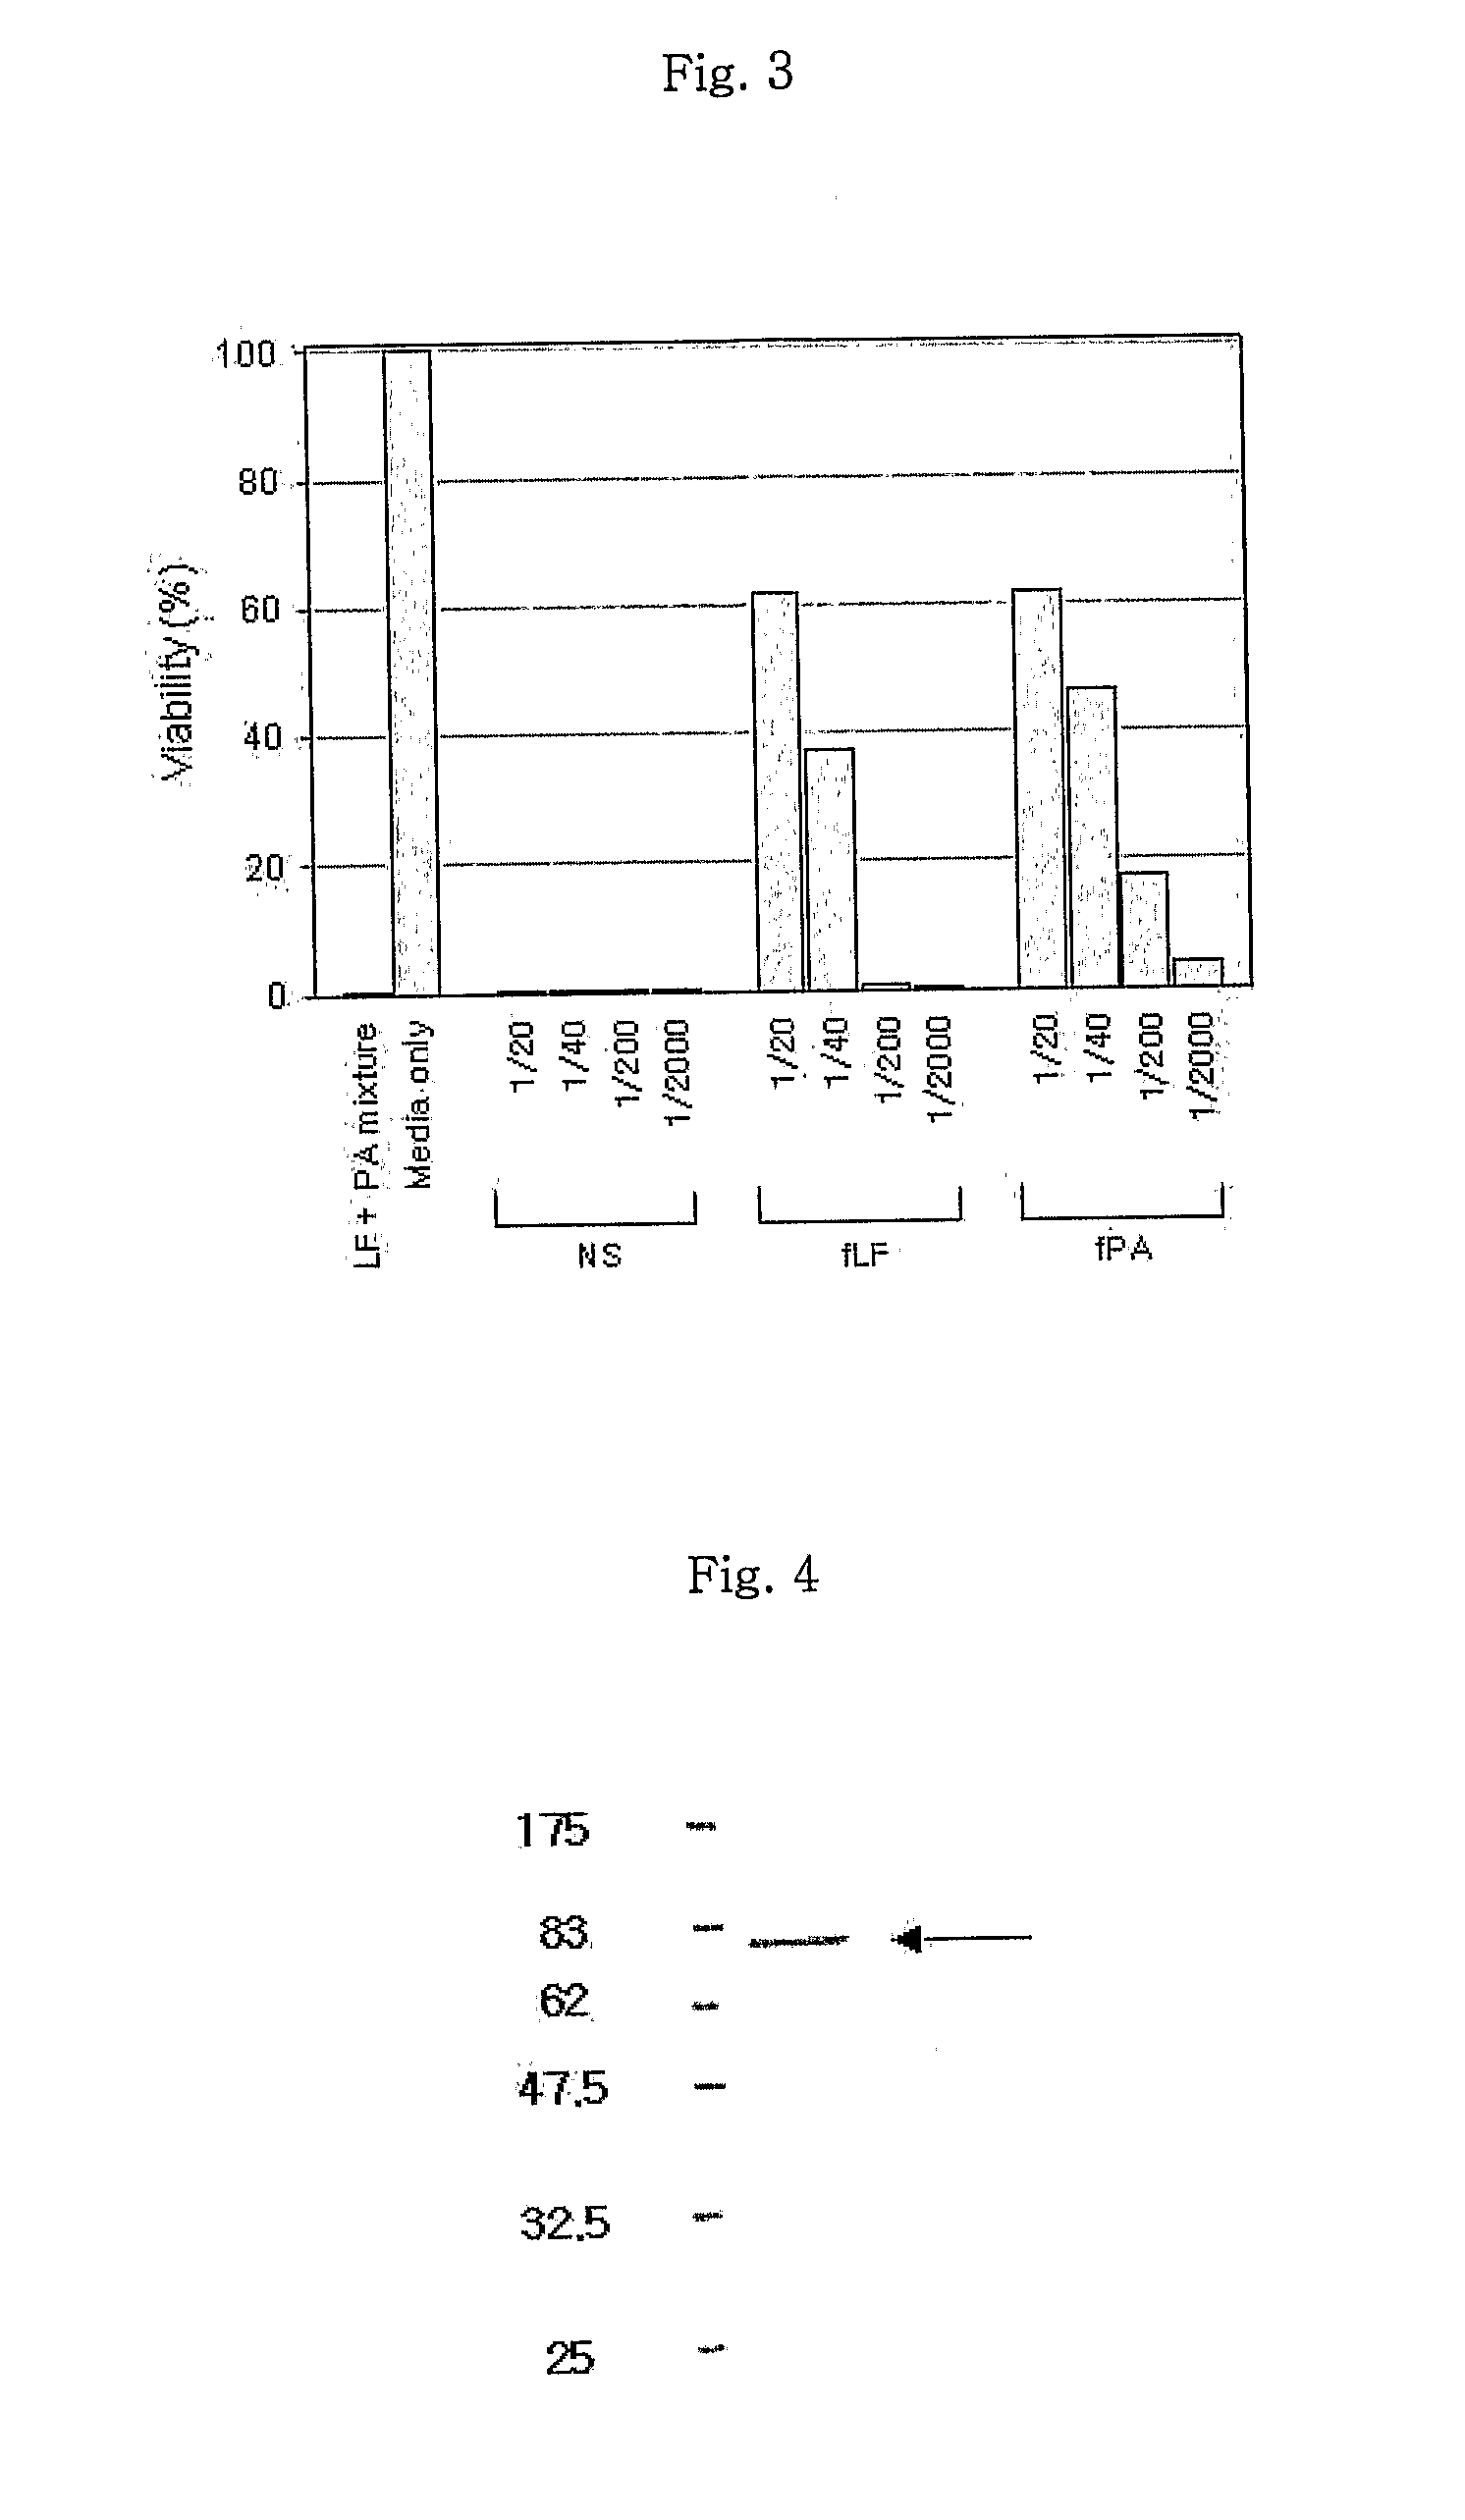 Monoclonal antibody specific to anthrax toxin